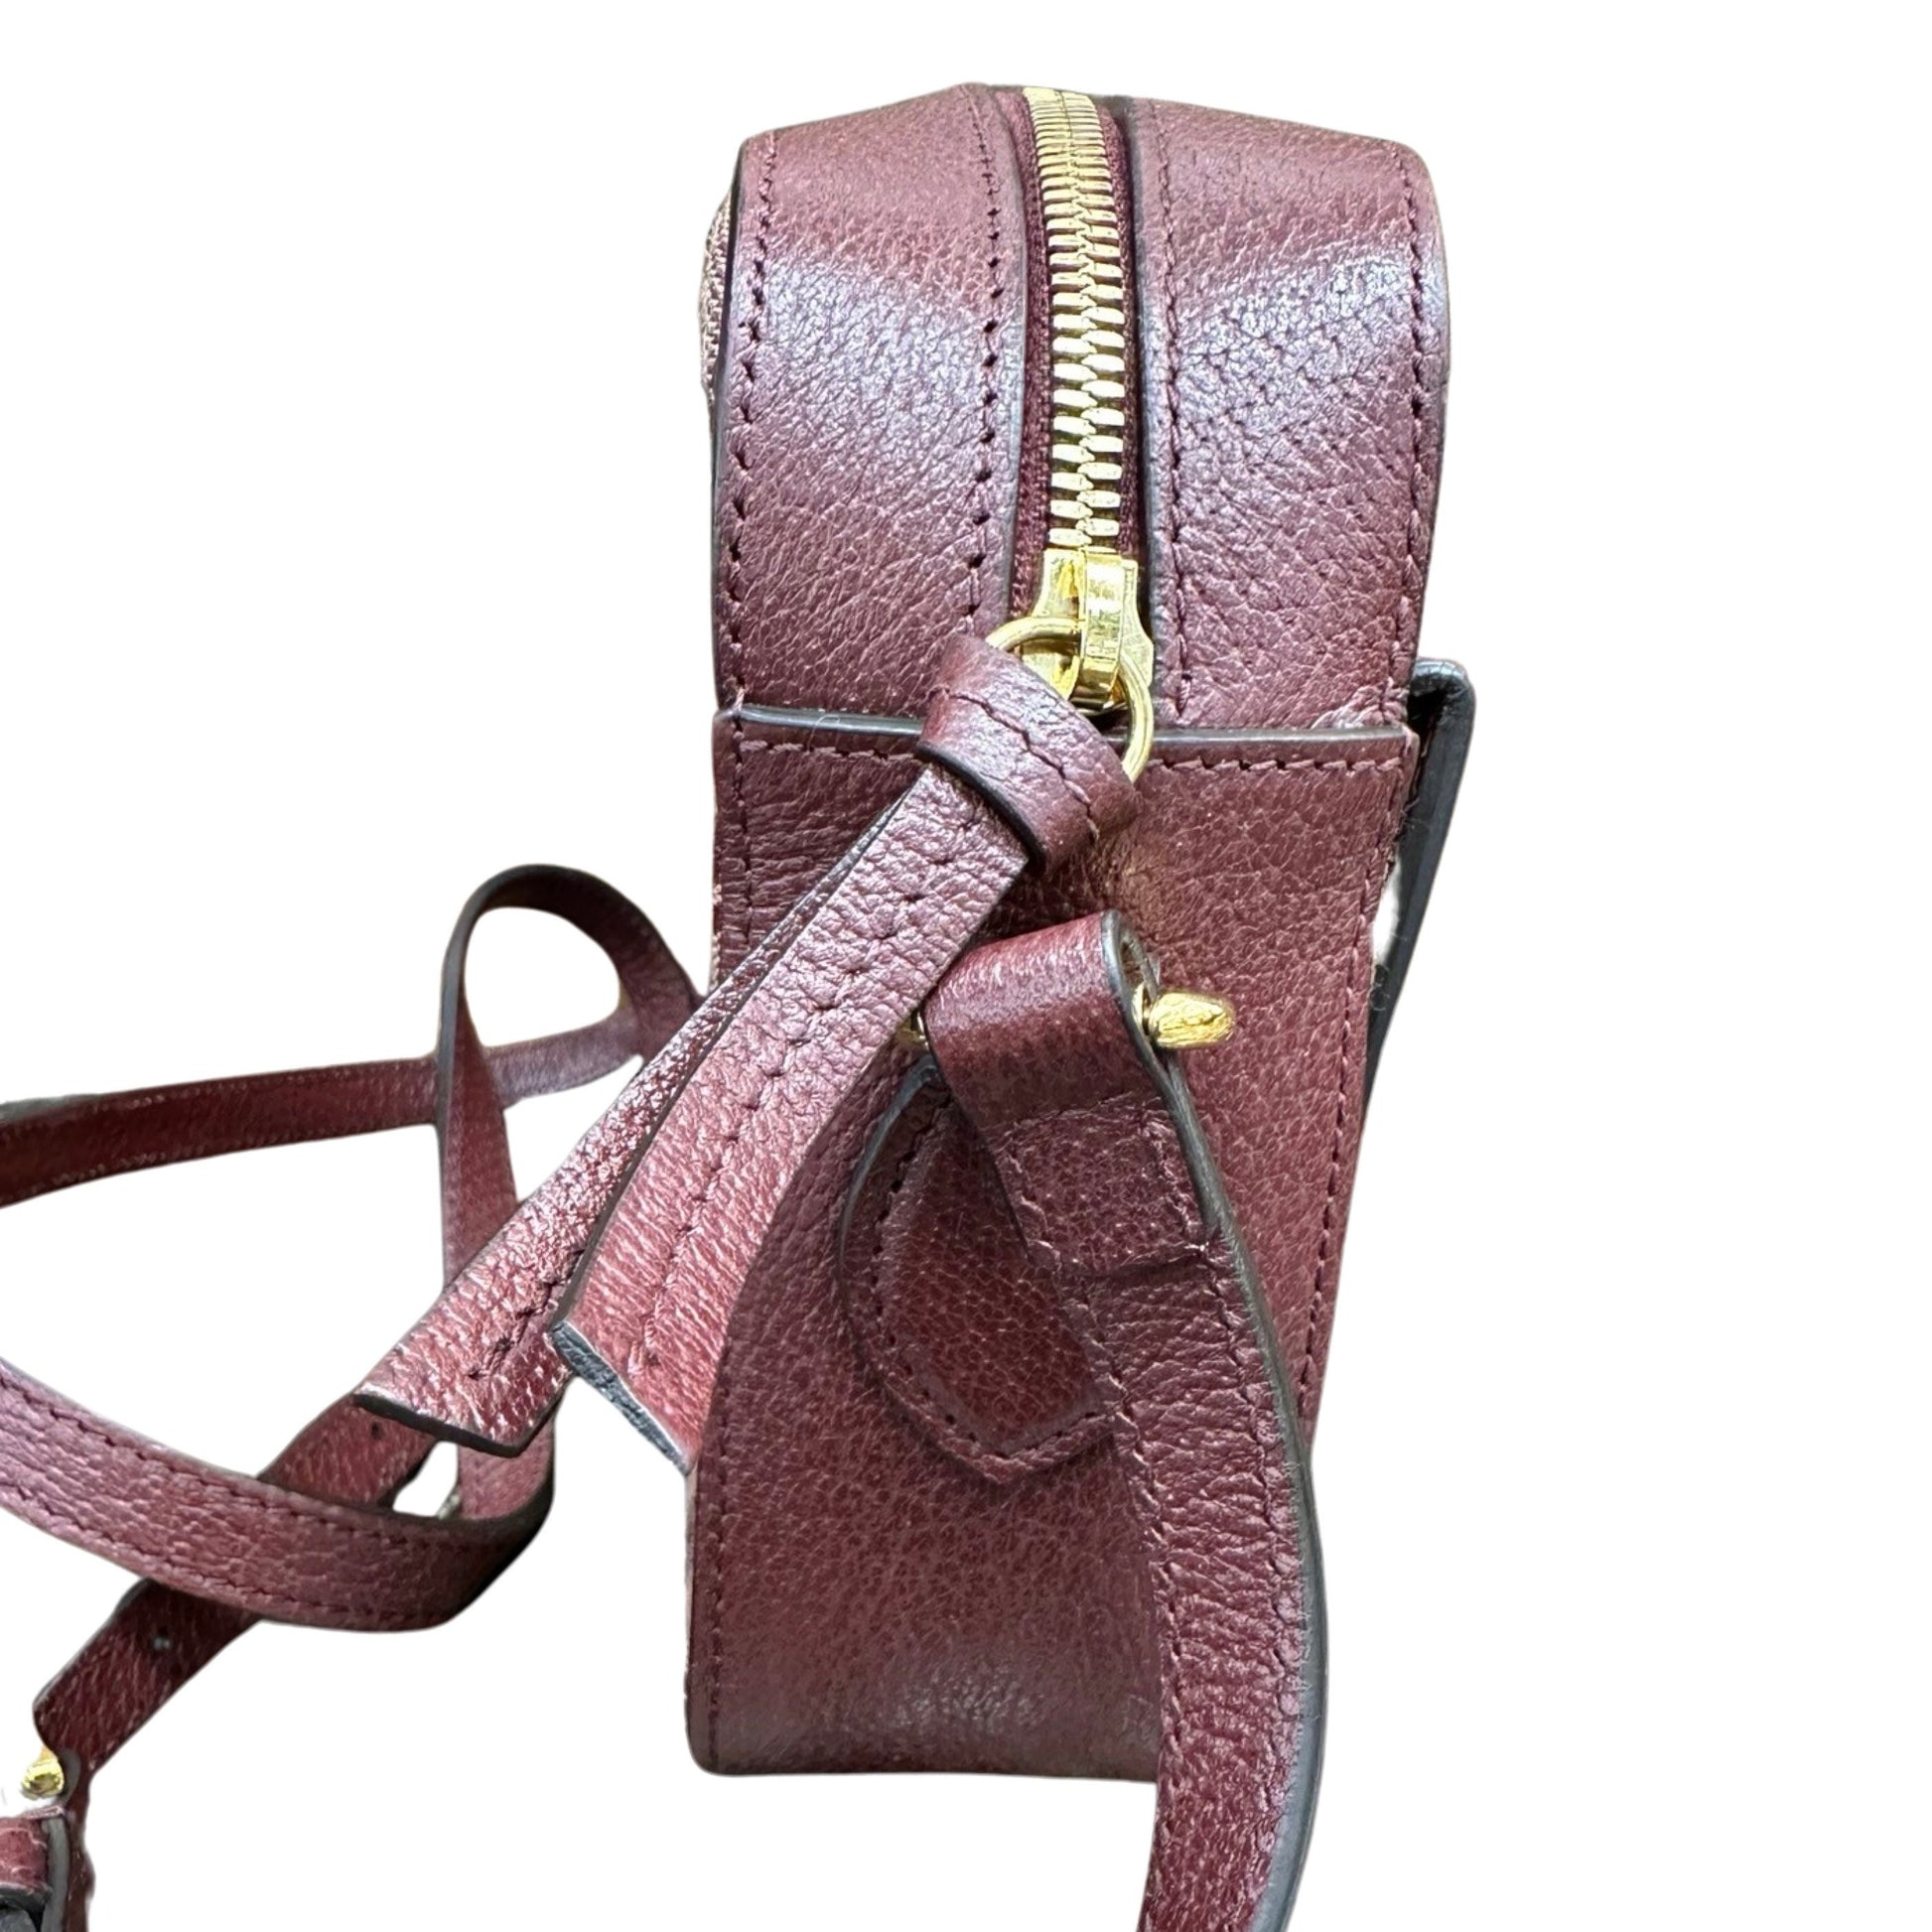 Side of bag with Burgundy leather and gold hardware